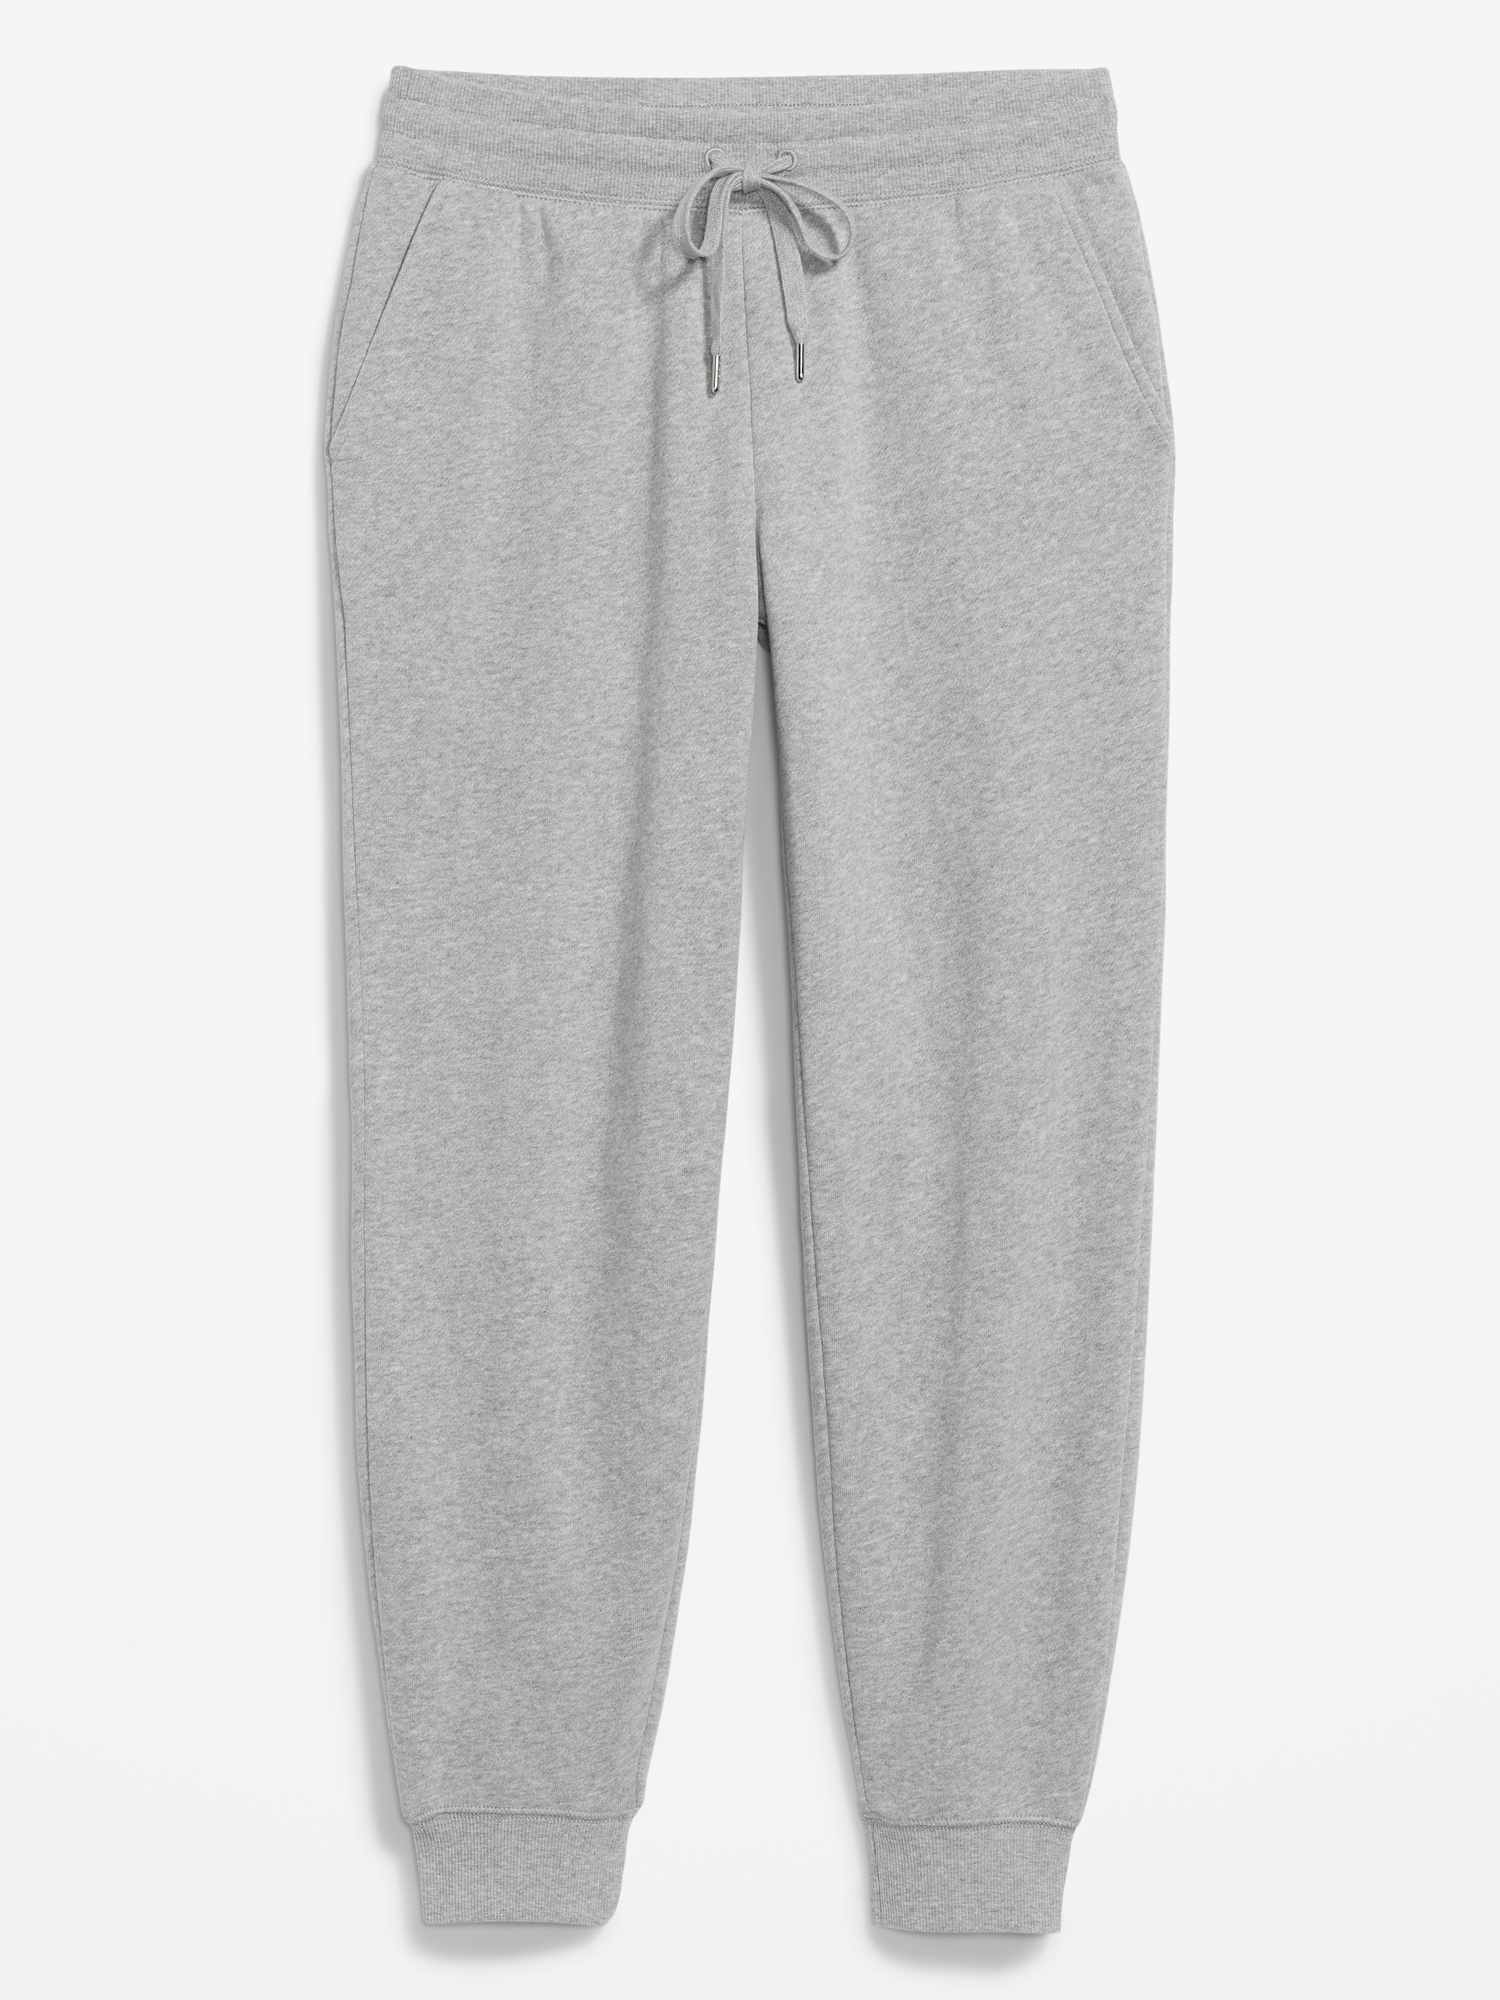 Mid-Rise Vintage Street Jogger Sweatpants for Women, Old Navy